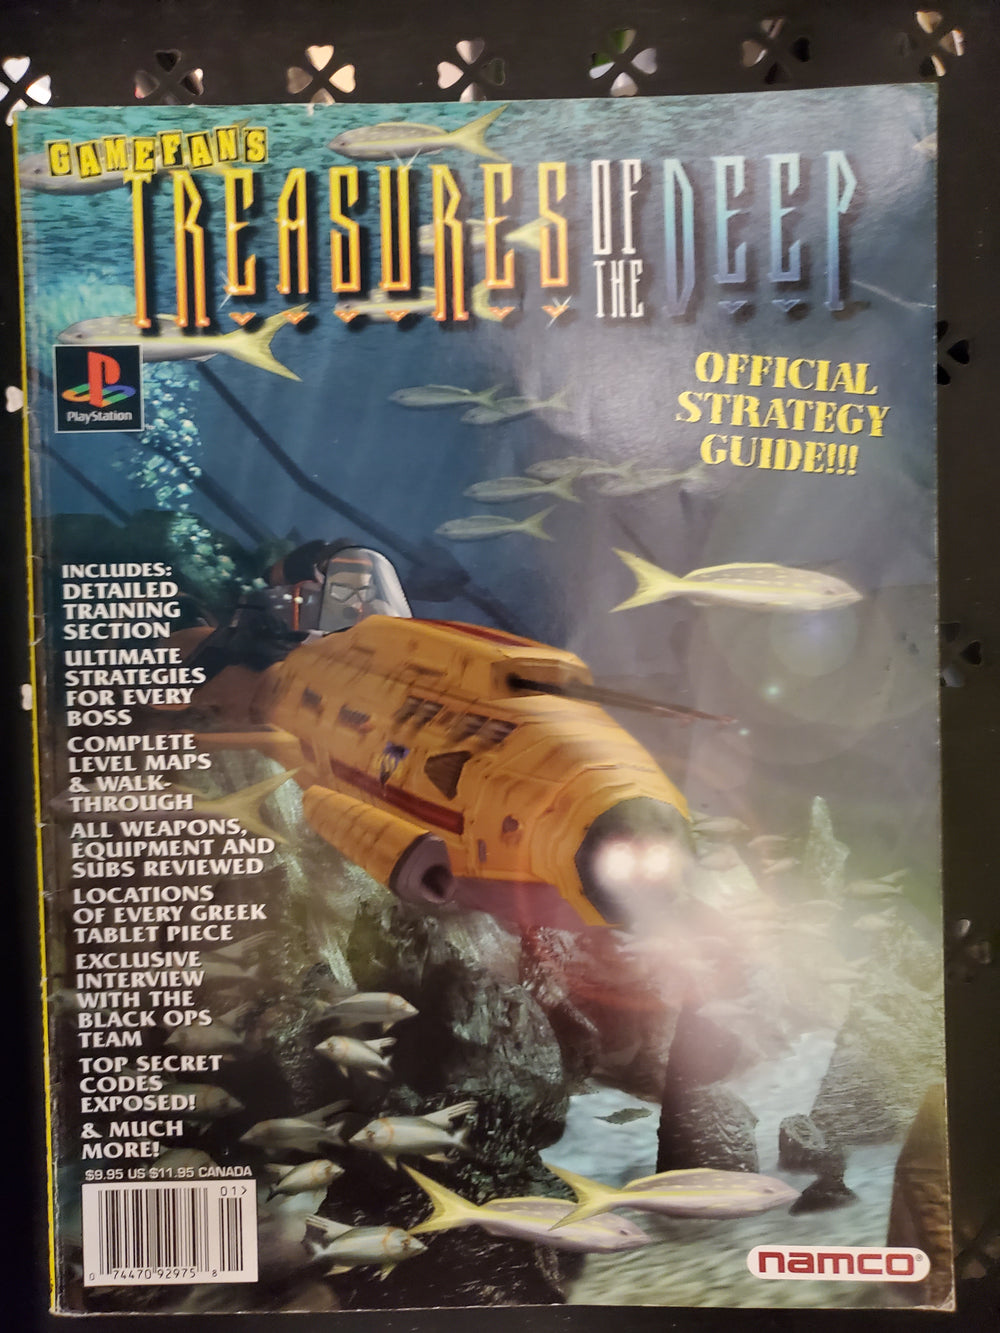 GAME GUIDES - TREASURES OF THE DEEP